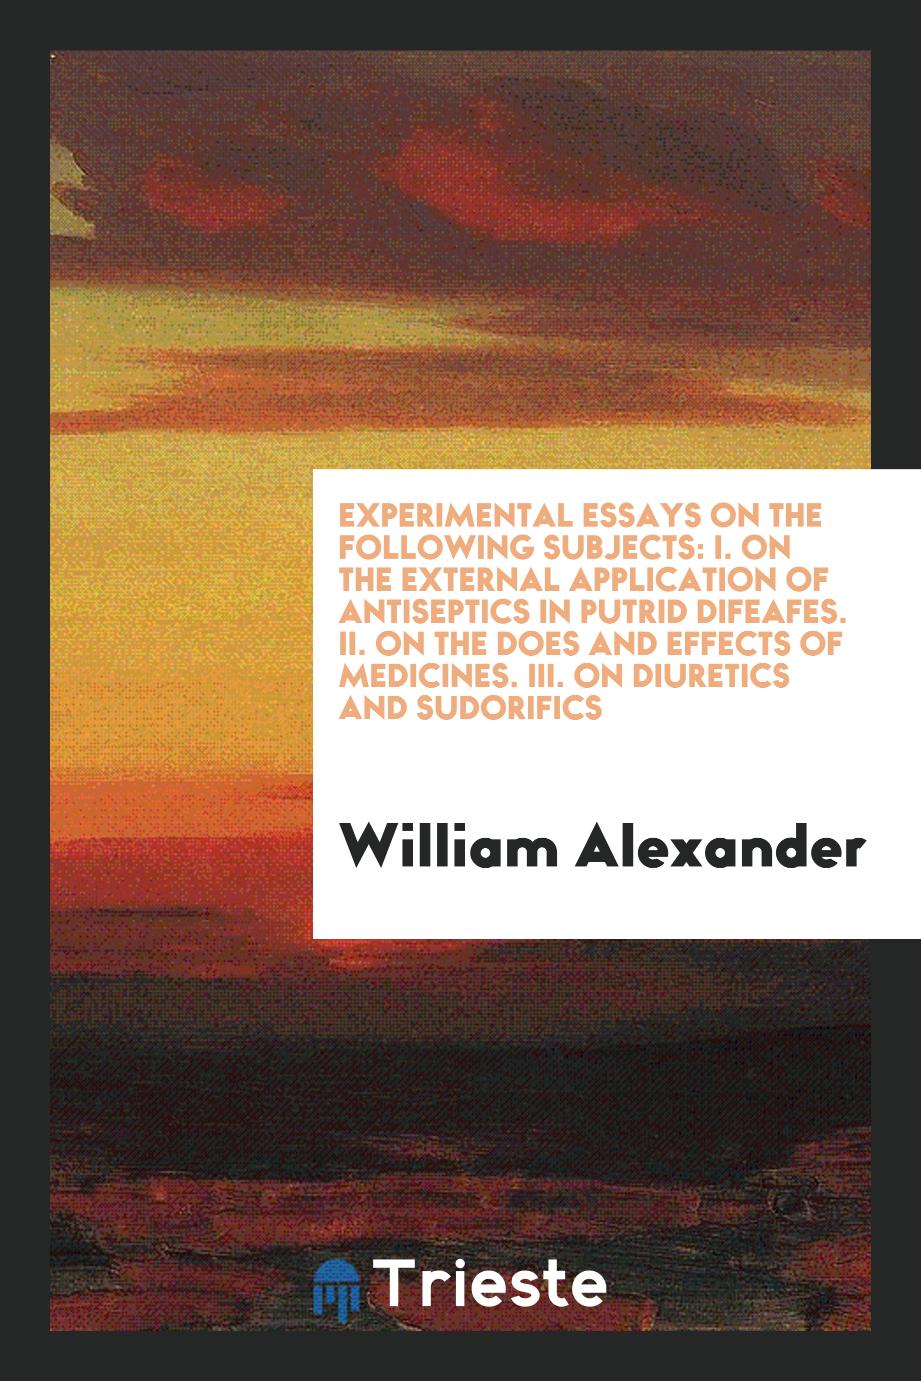 Experimental Essays on the Following Subjects: I. On the External Application of Antiseptics in Putrid Difeafes. II. On the Does and Effects of Medicines. III. On Diuretics and Sudorifics